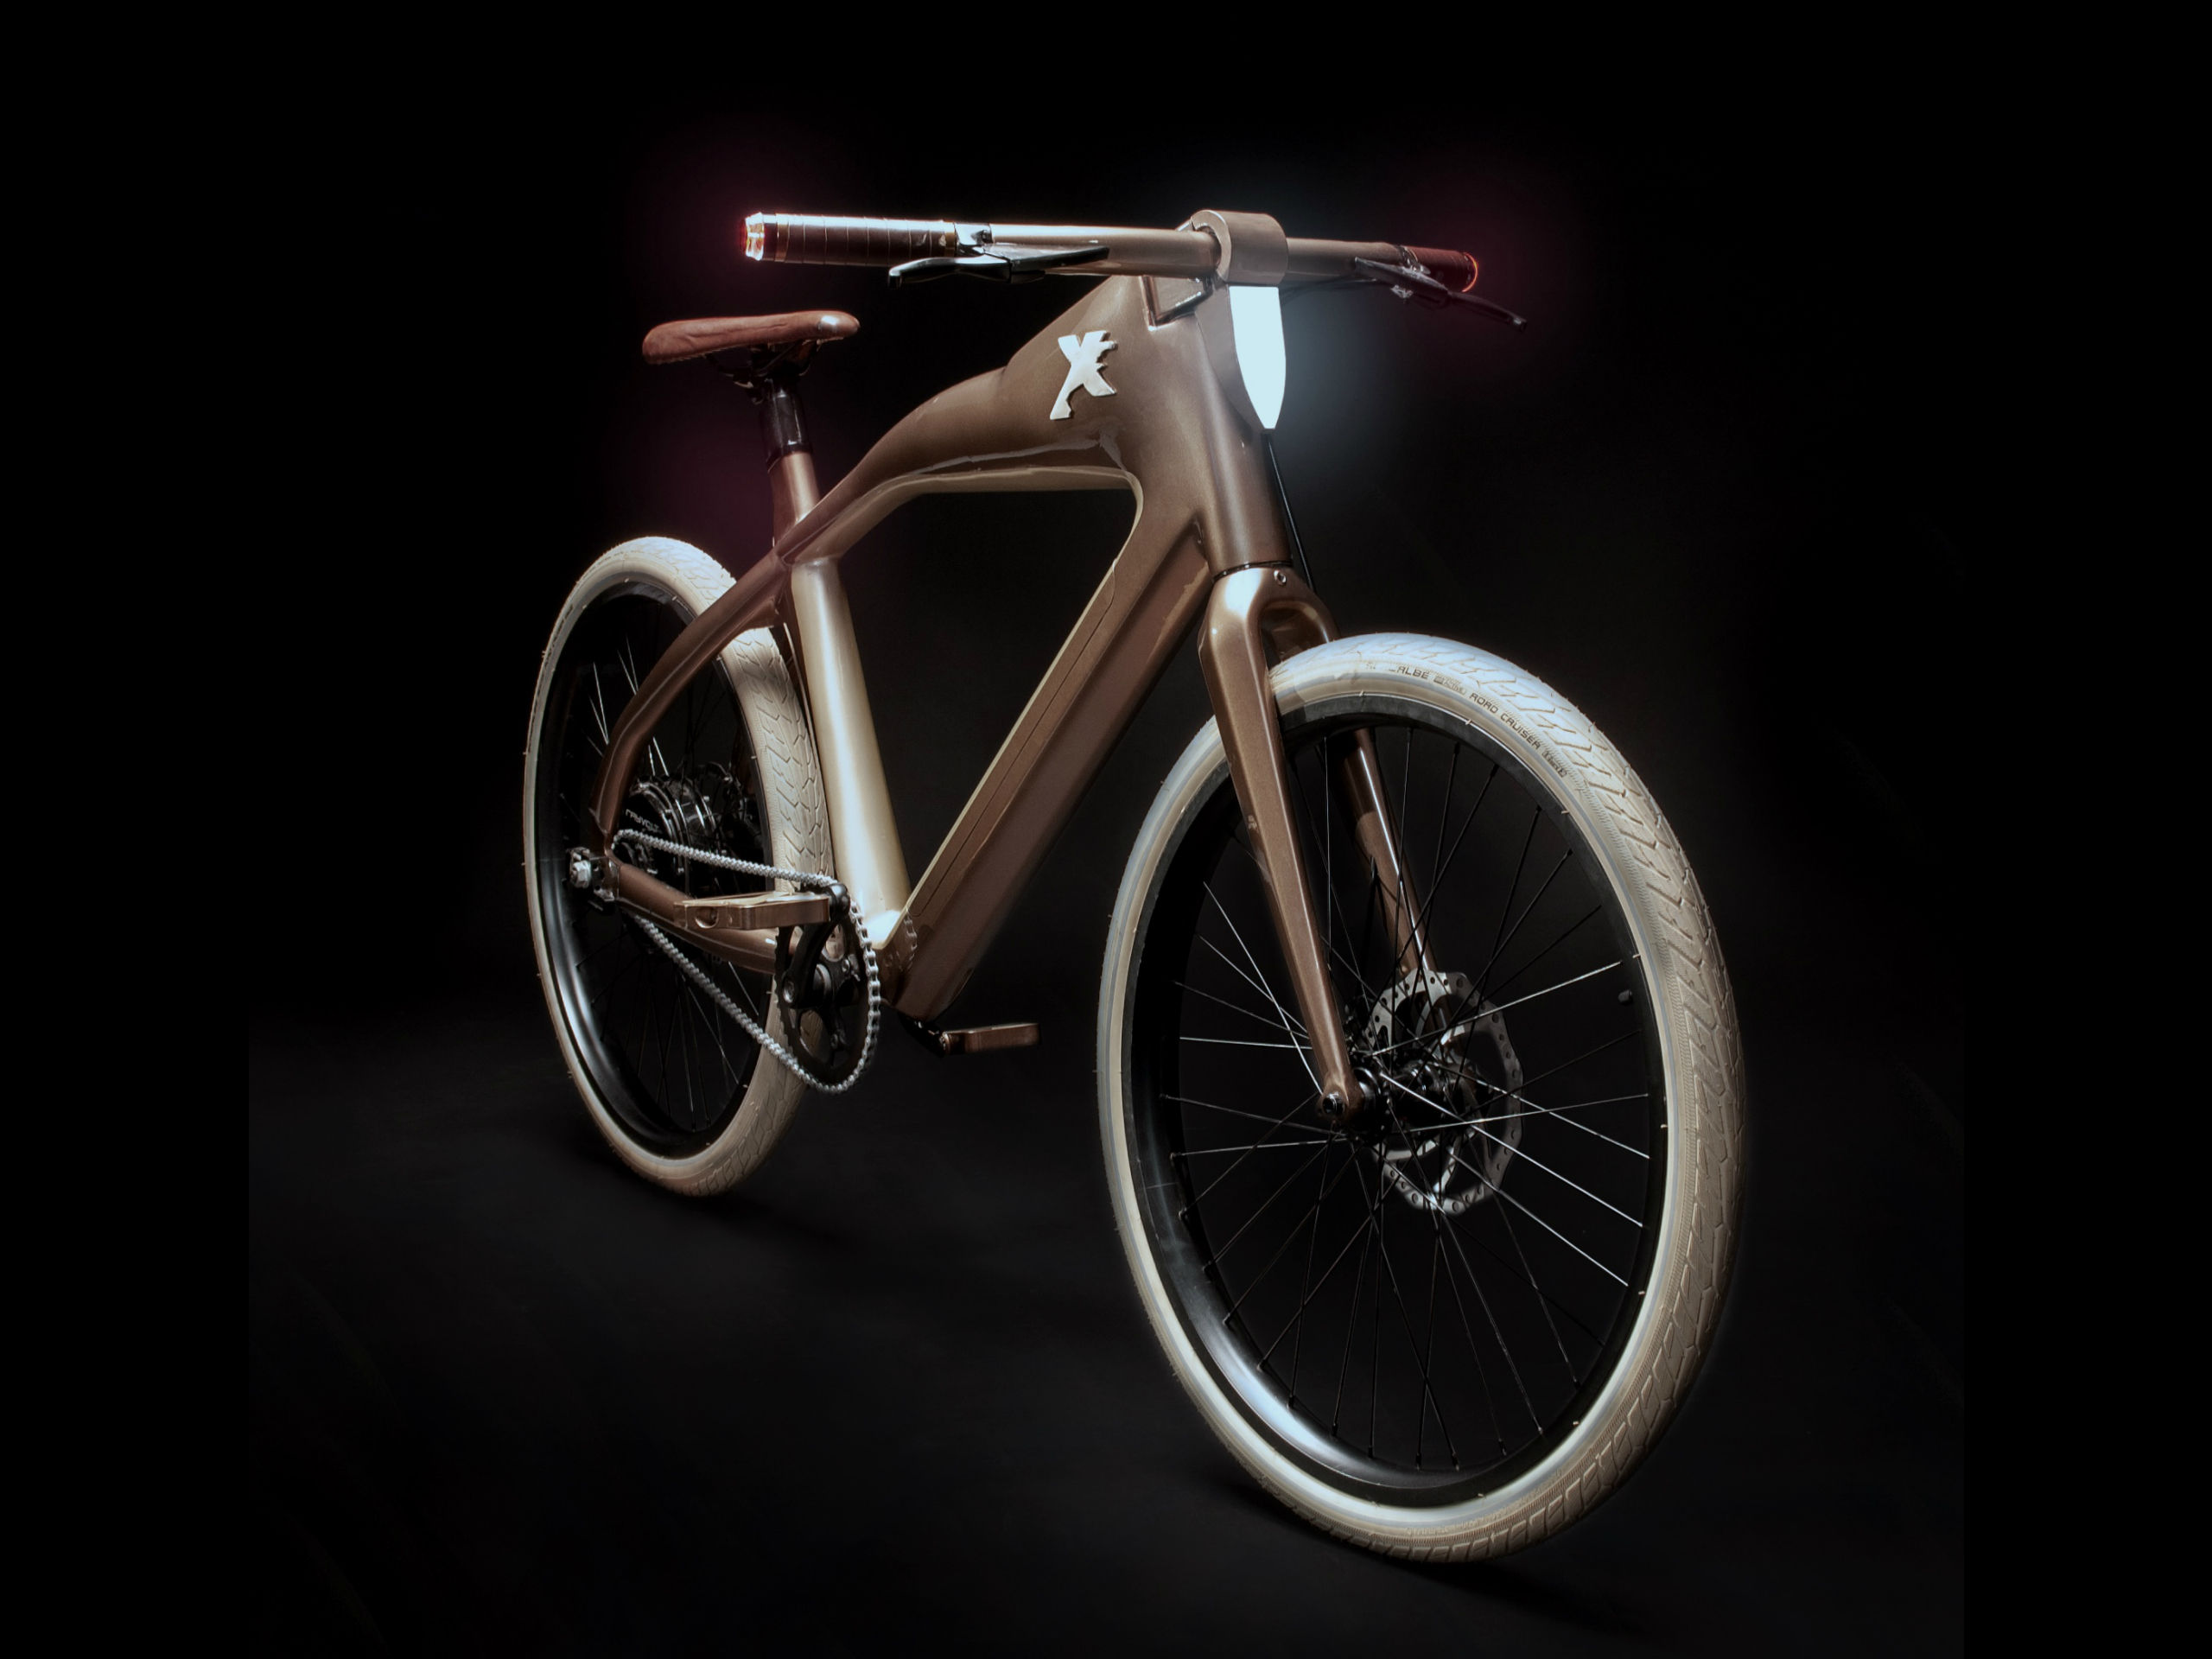 X One Electric Bike Gets Facial Recognition Feature - ZigWheels